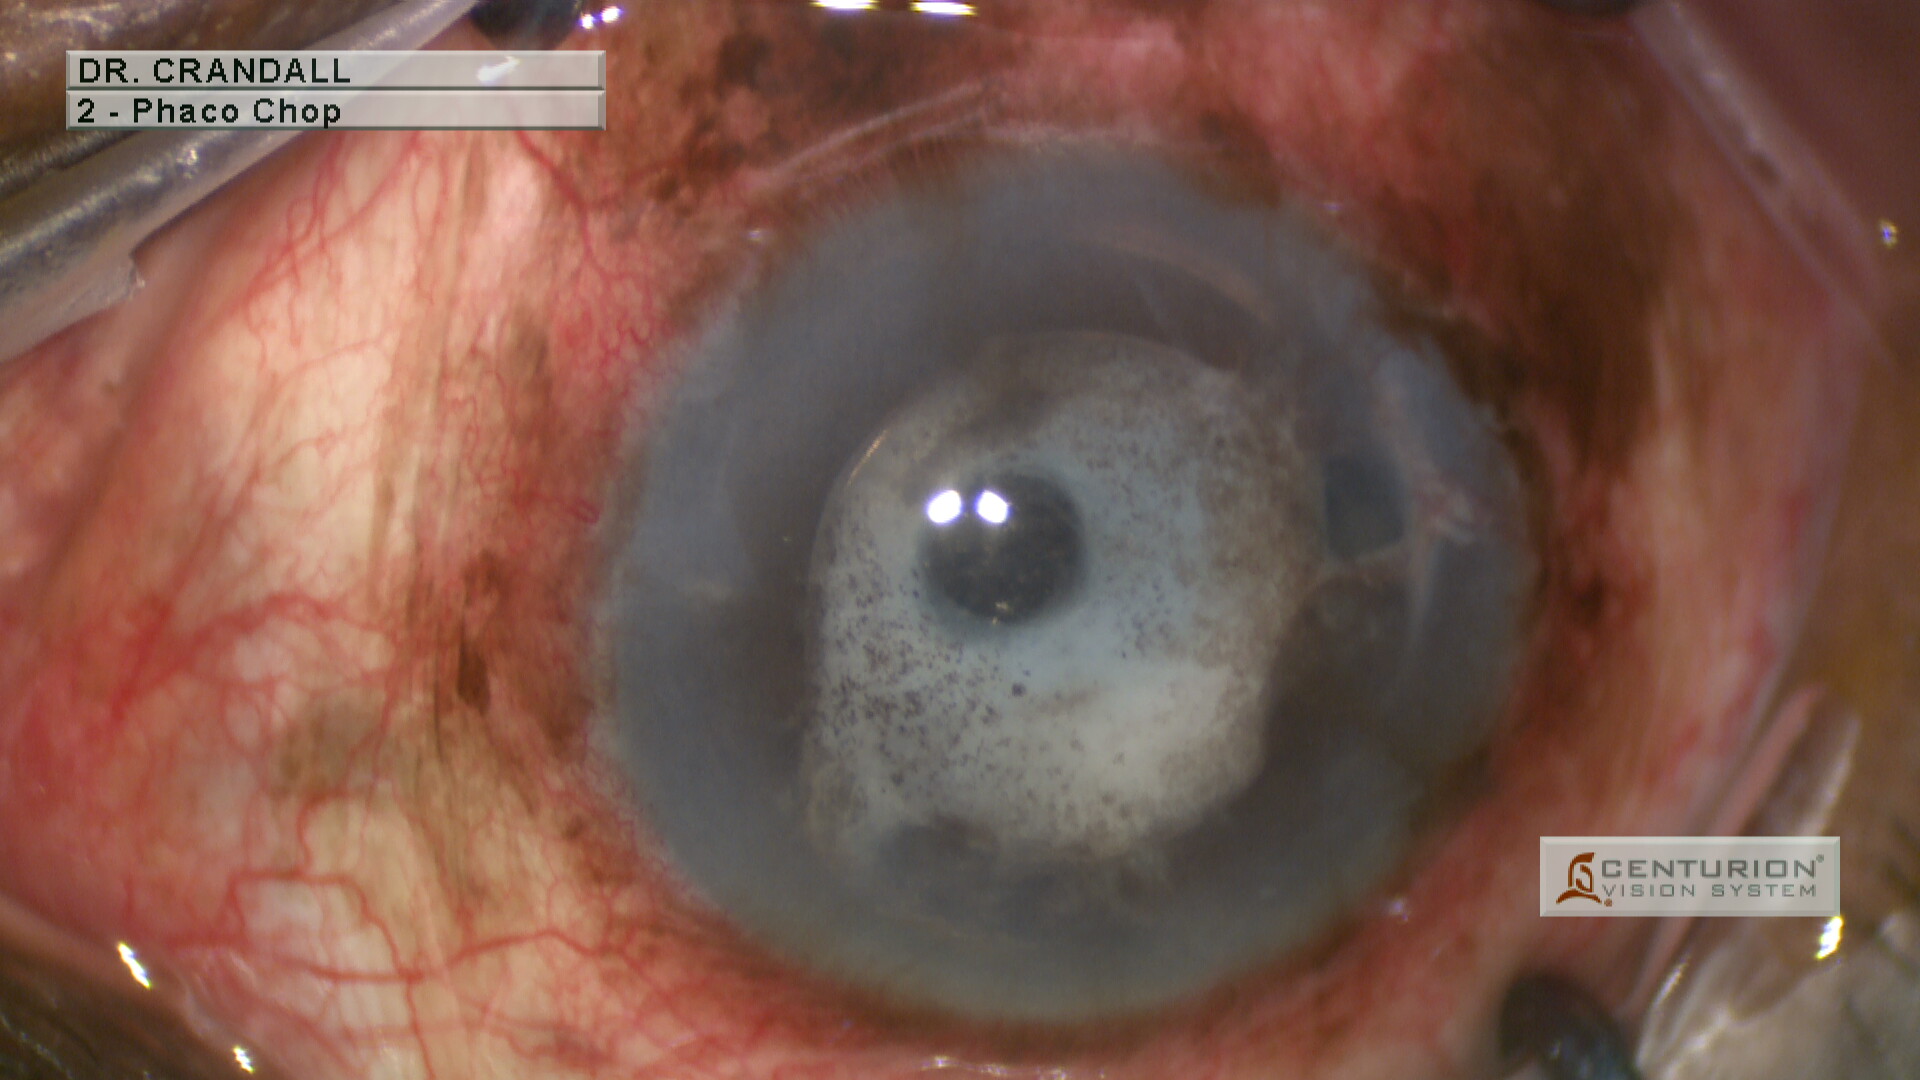 Inflamed cocoon anterior chamber IOL secondary to Uveitis-Glaucoma-Hyphema syndrome (UGH syndrome): UGH syndrome is a rare condition that classically presents with uveitis, glaucoma, and hyphema in the setting of an anterior chamber IOL